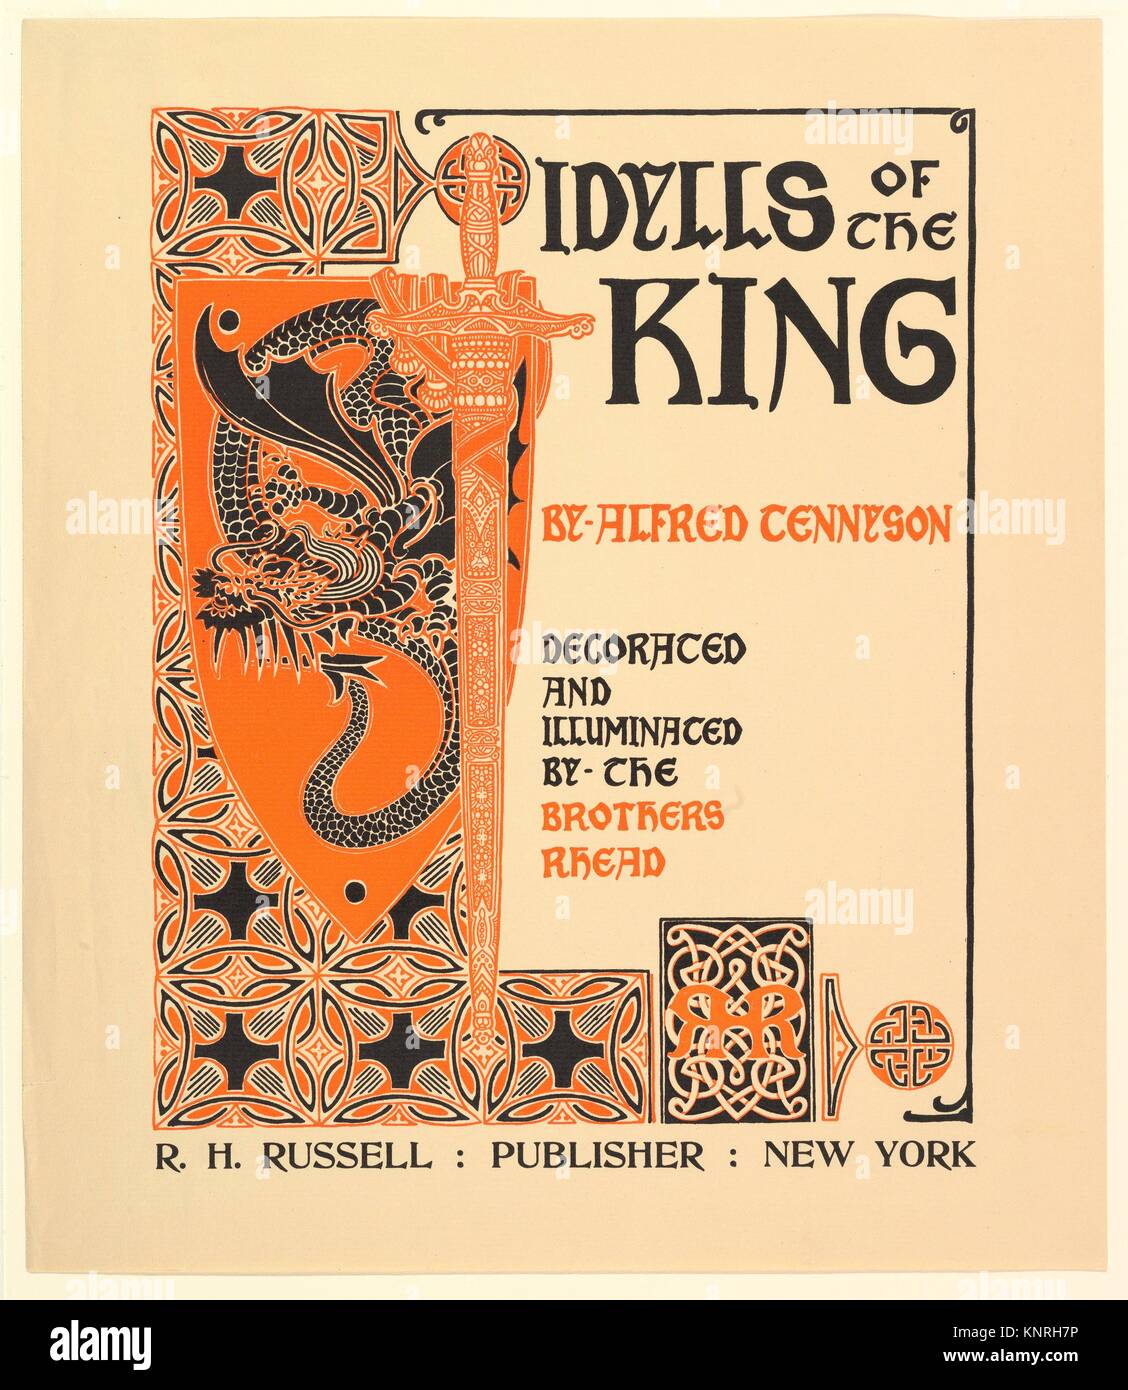 Idylls of the King by Alfred Tennyson. Artist: Louis John Rhead (American, born England, 1857-1926); Publisher: R. H. Russell (American, New York); Stock Photo